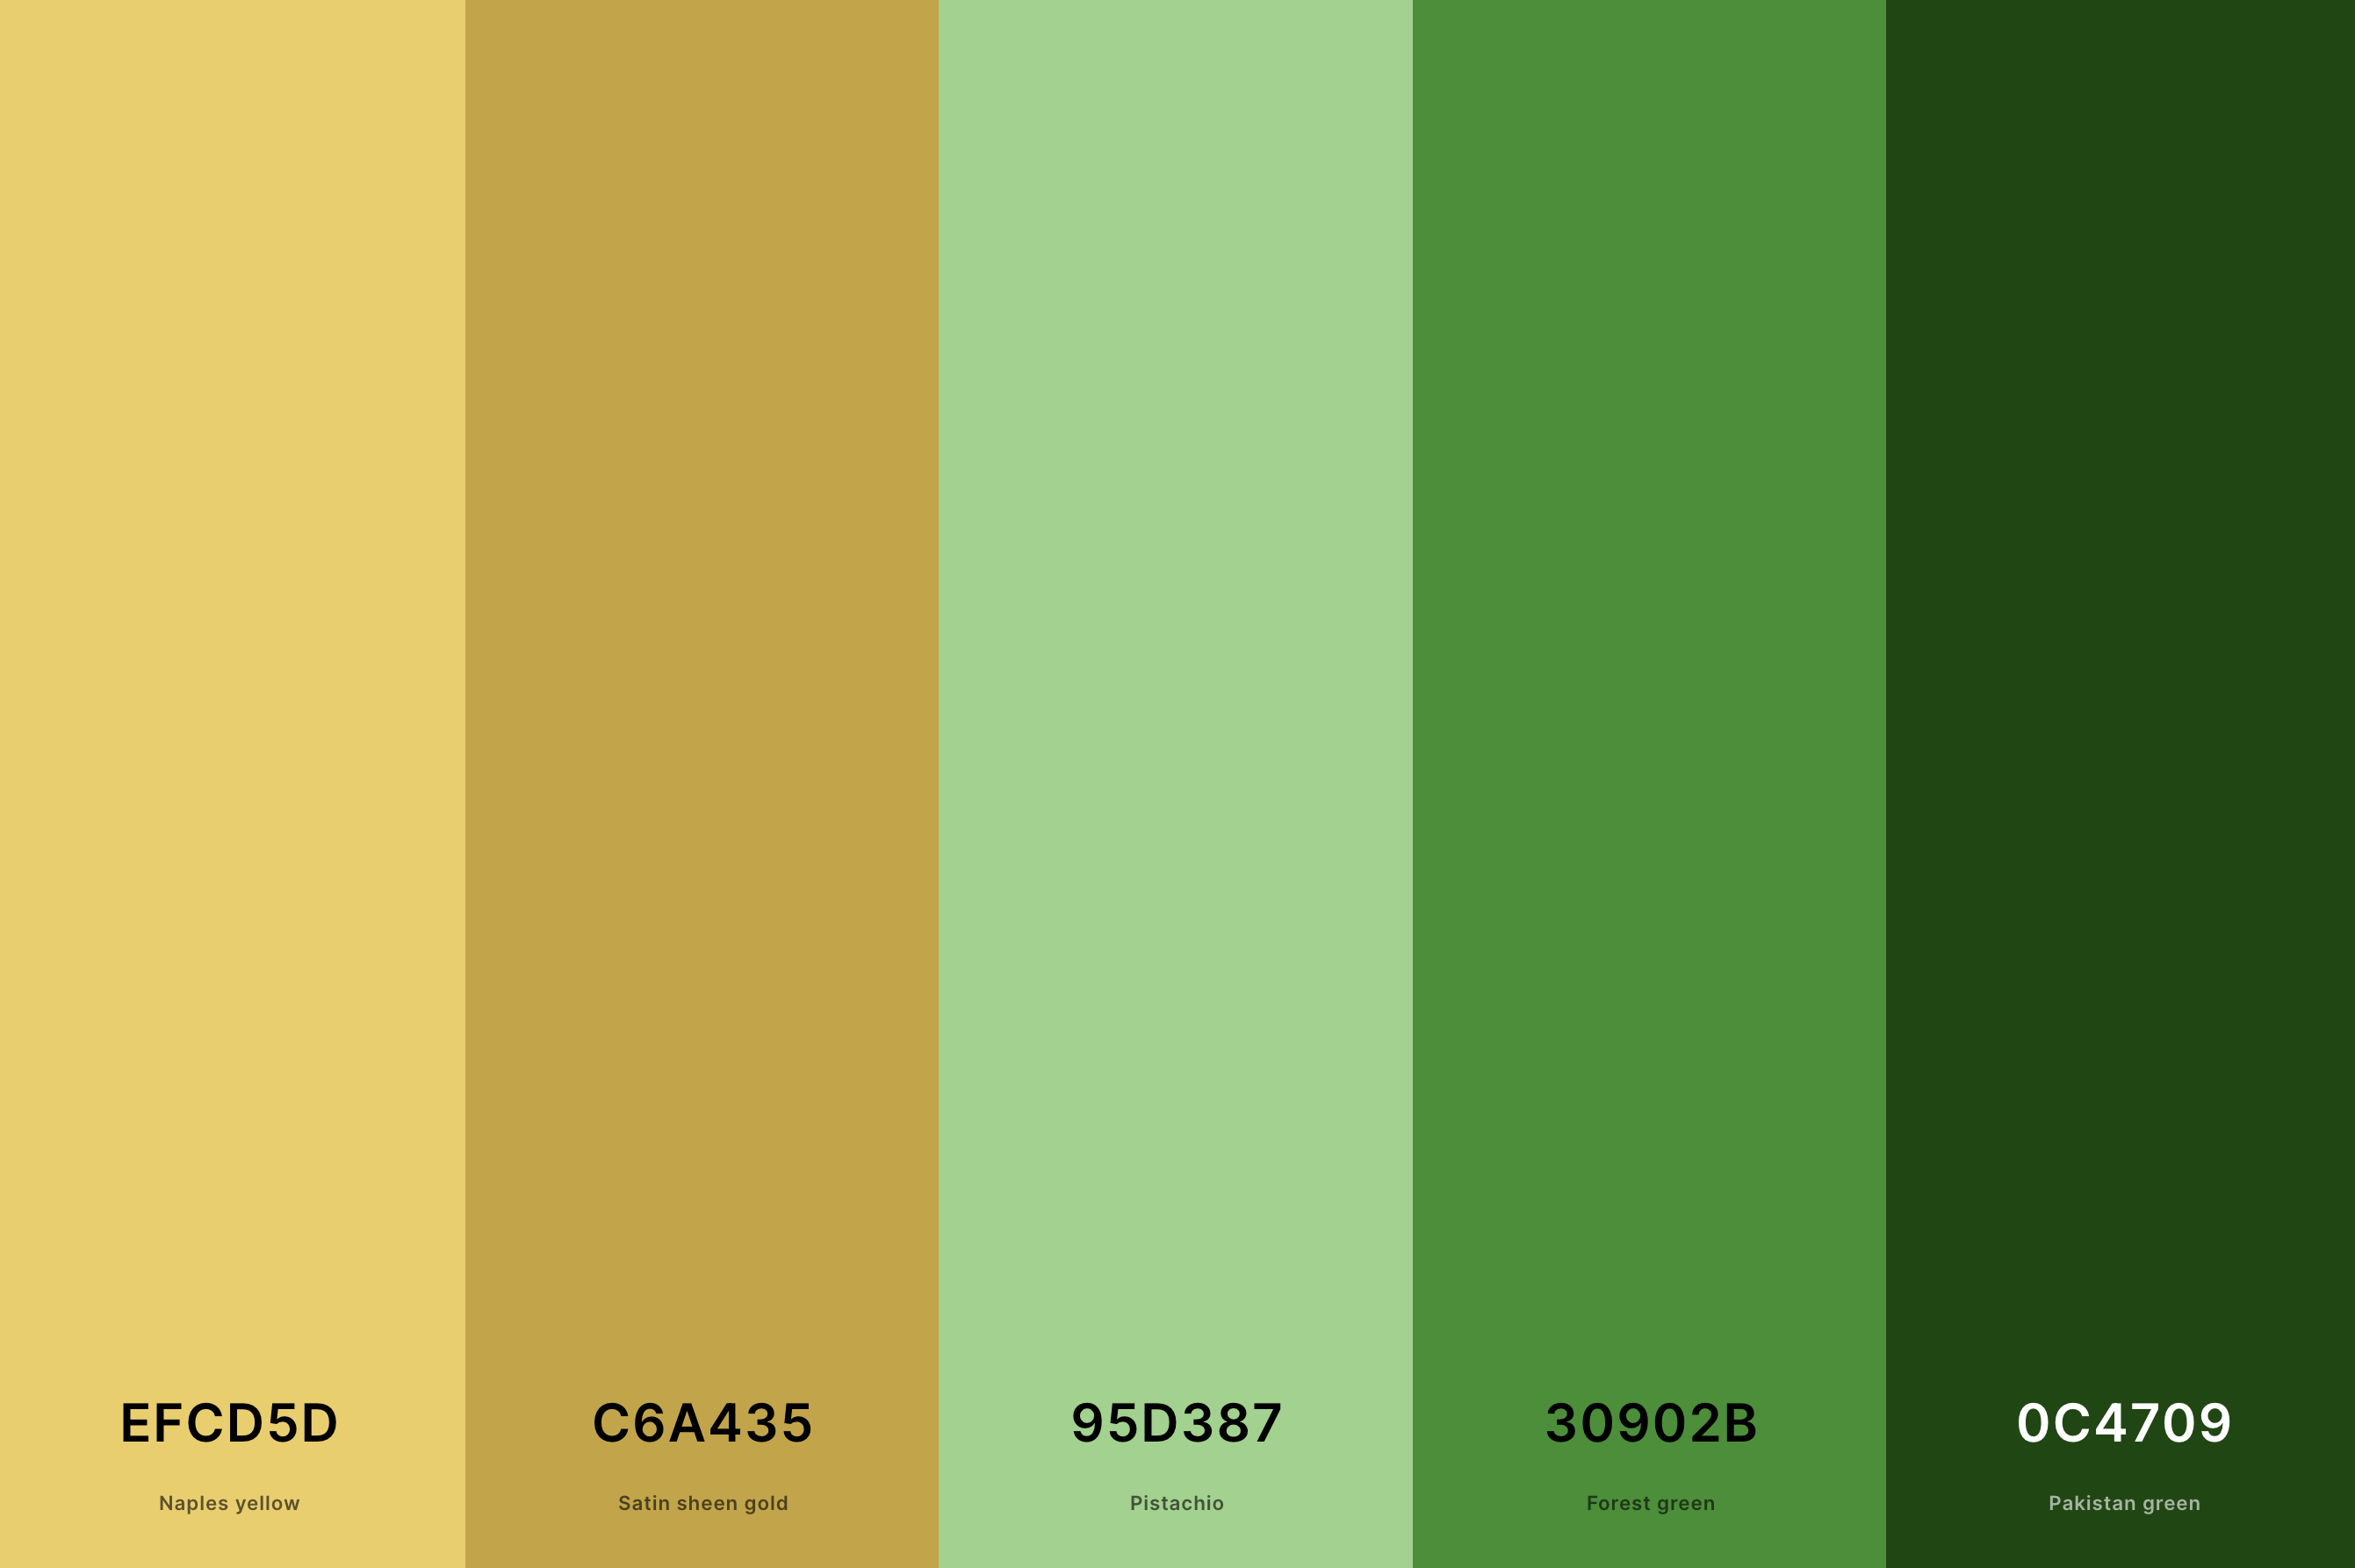 5. Green And Gold Color Palette Color Palette with Naples Yellow (Hex #EFCD5D) + Satin Sheen Gold (Hex #C6A435) + Pistachio (Hex #95D387) + Forest Green (Hex #30902B) + Pakistan Green (Hex #0C4709) Color Palette with Hex Codes